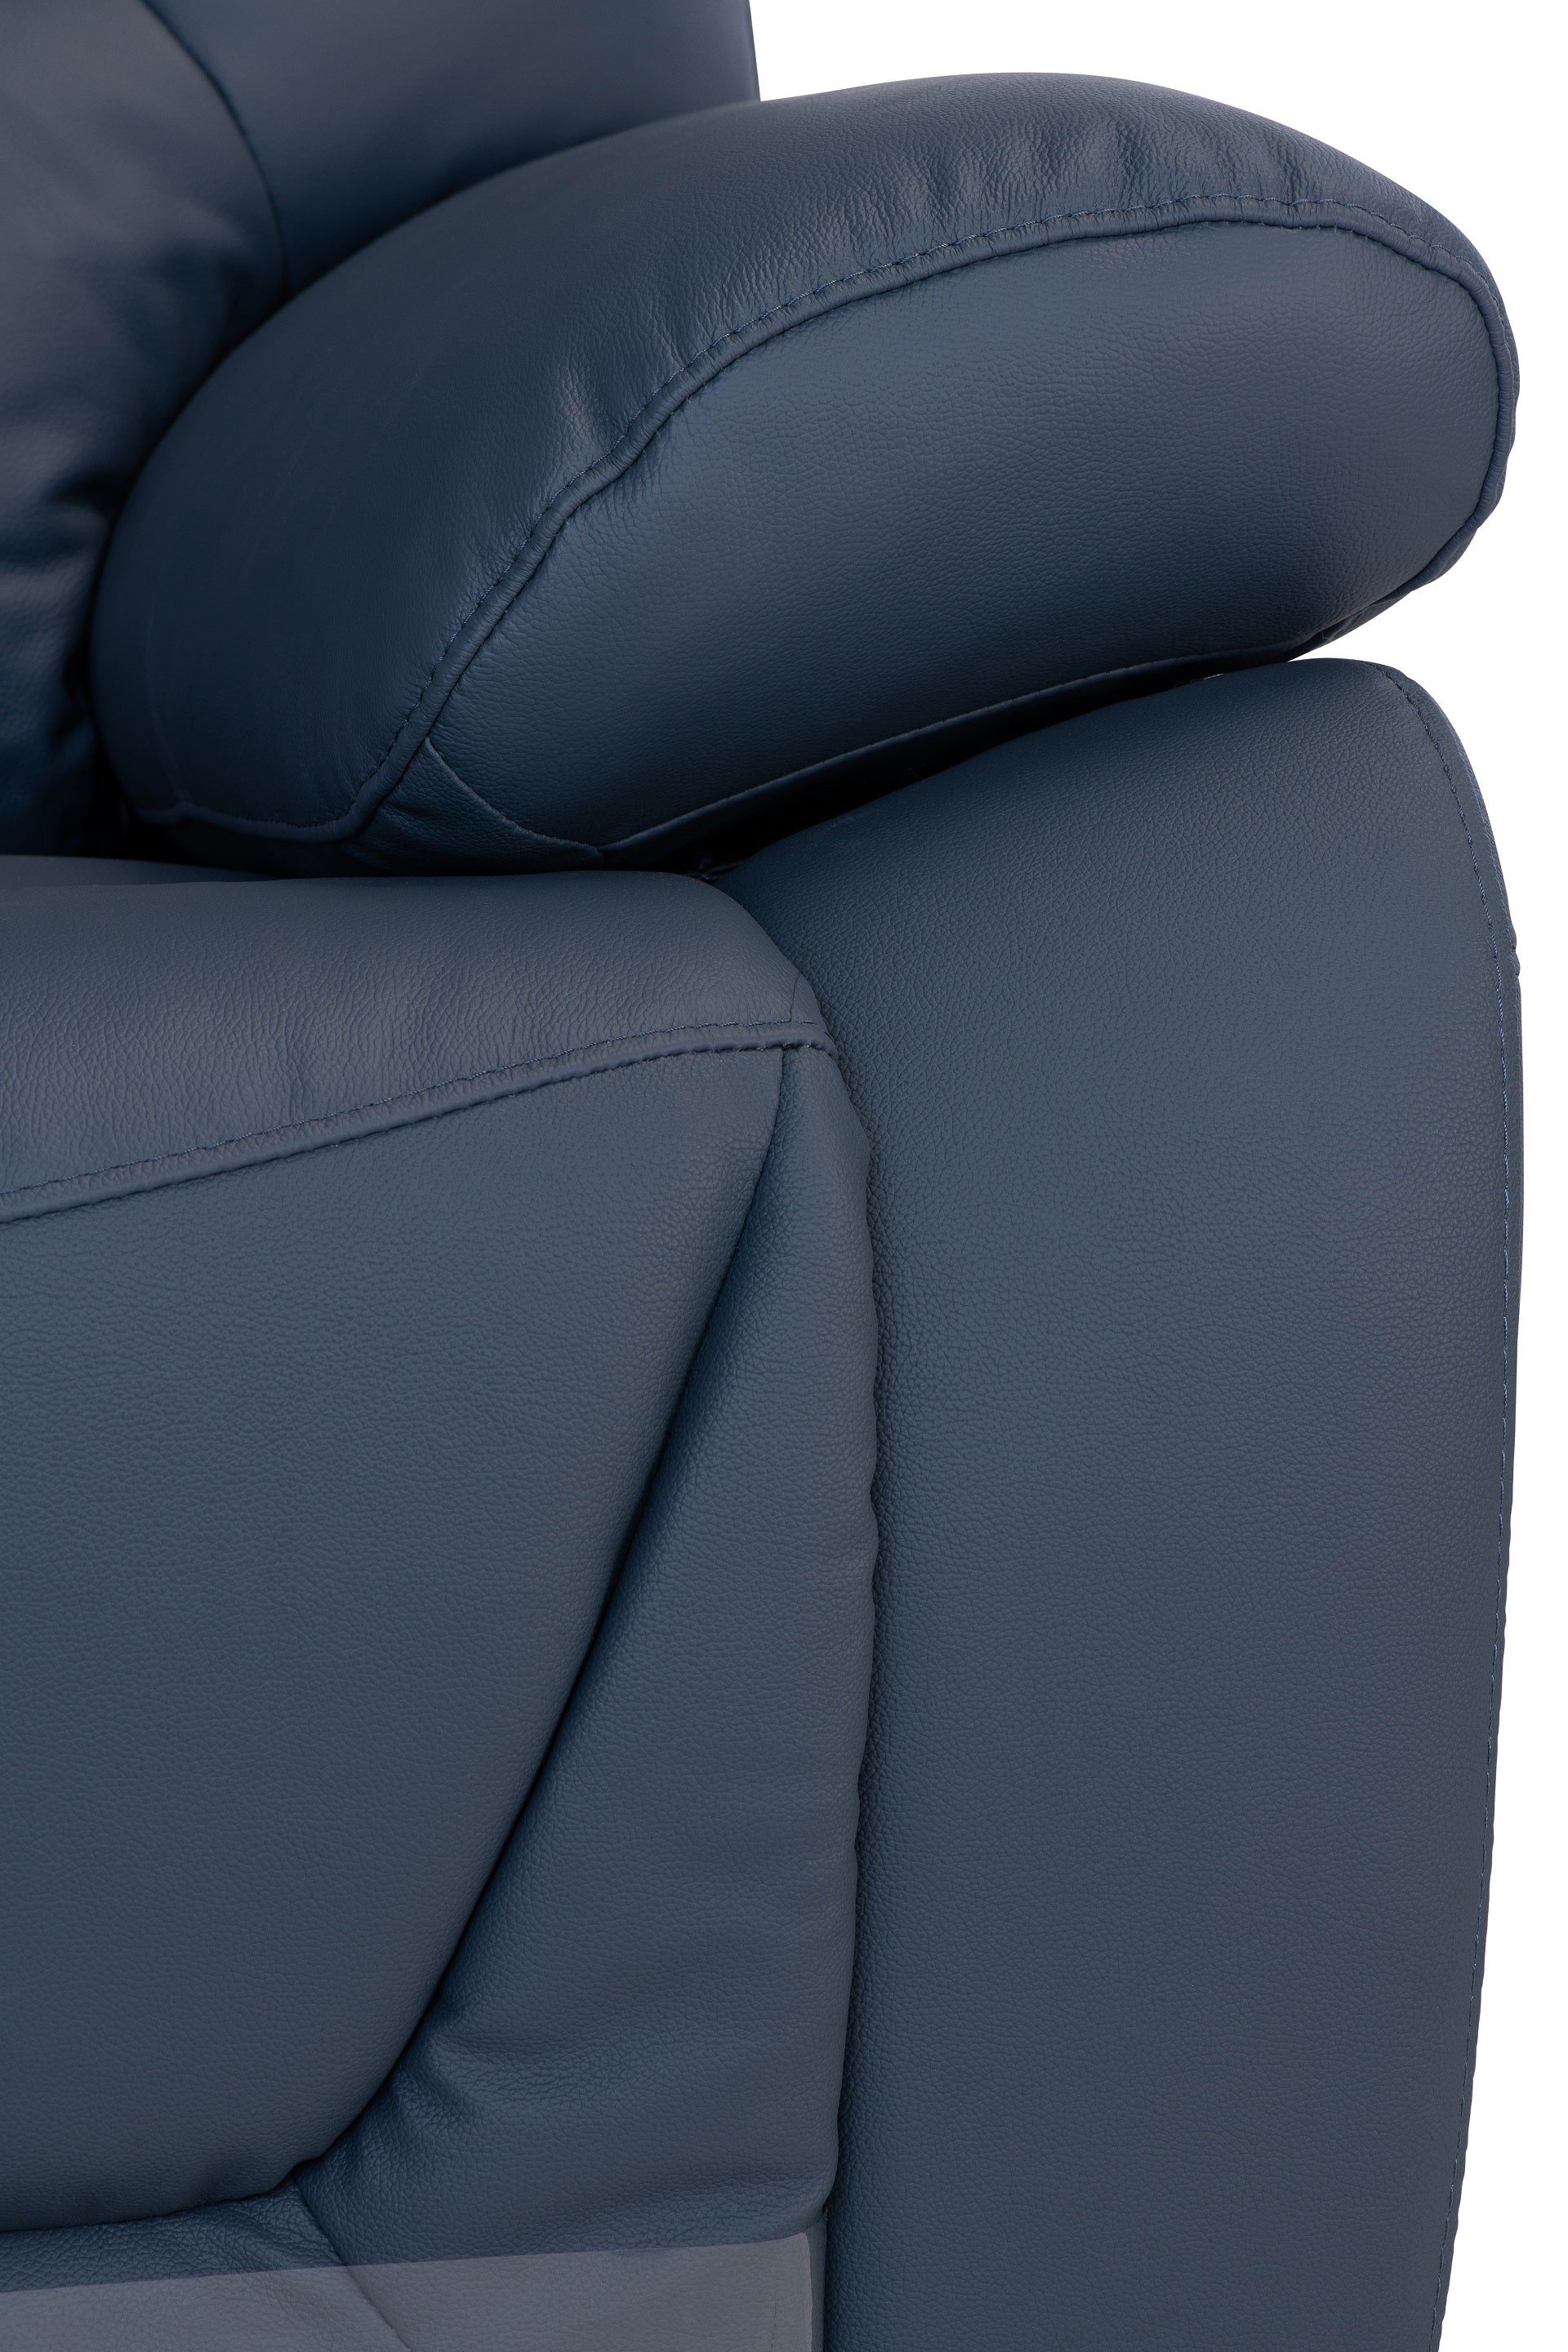 Darah Leather Electric 2 Seater Recliner - Blue